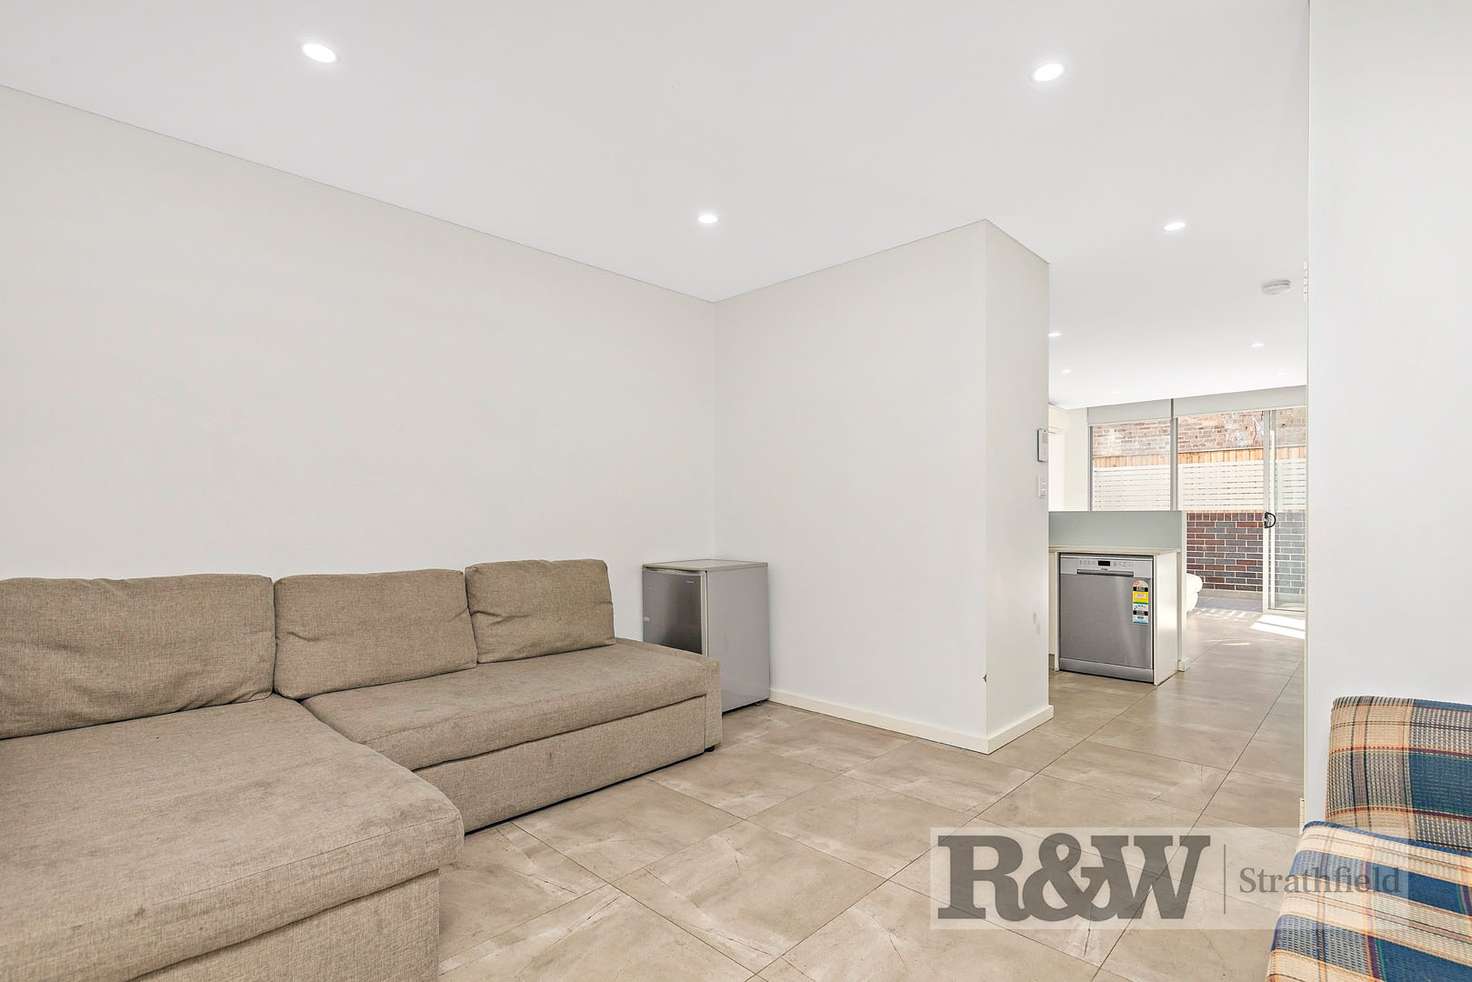 Main view of Homely apartment listing, 4/316 PARRAMATTA ROAD, Burwood NSW 2134